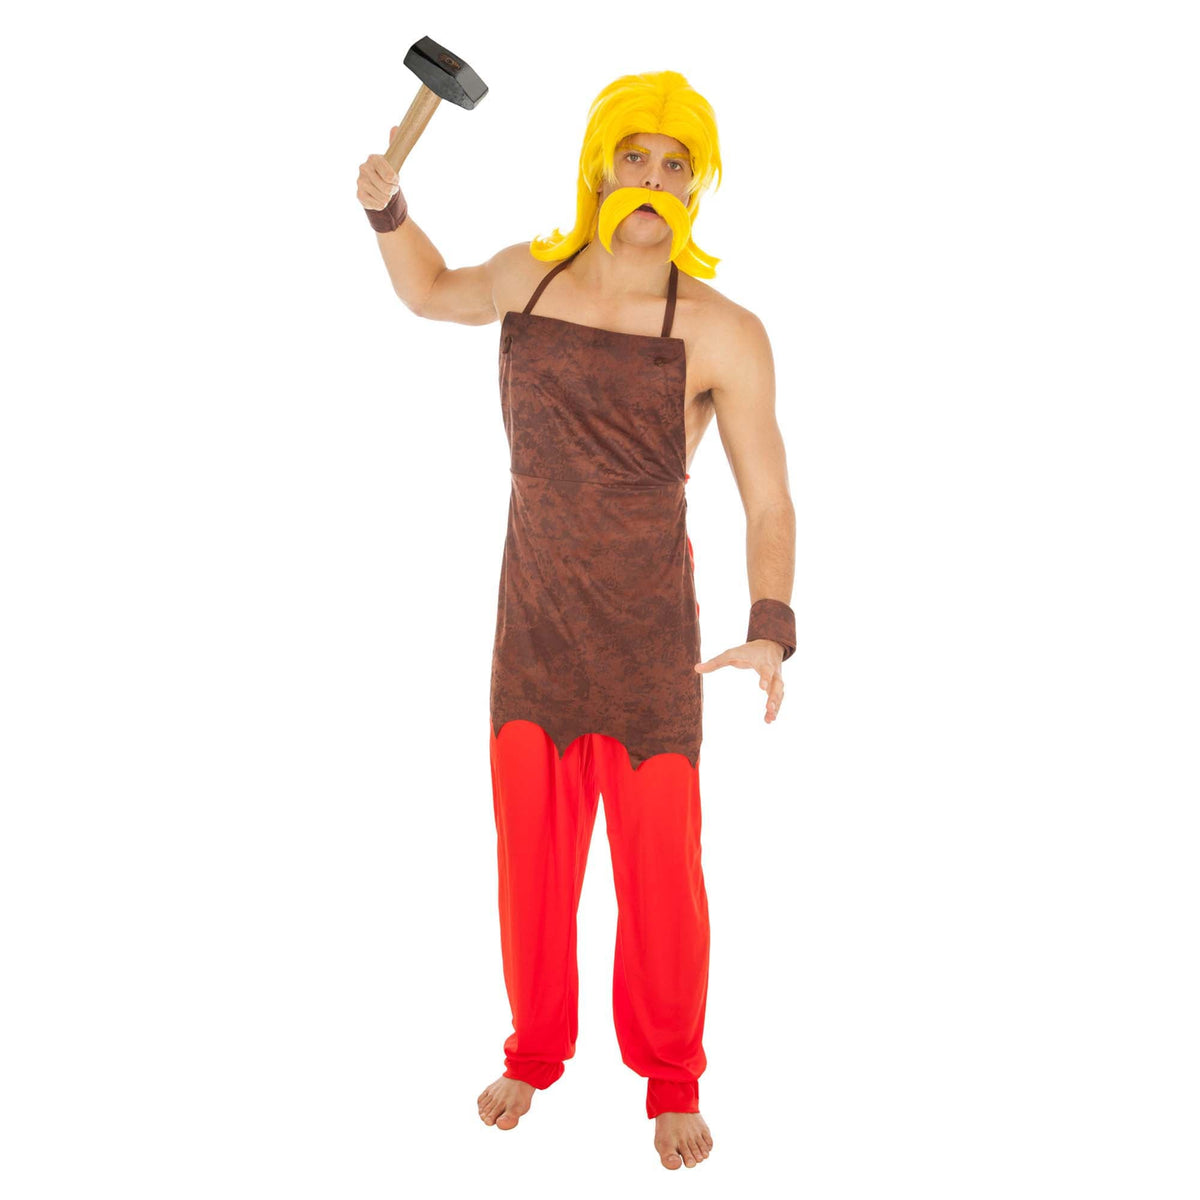 CHAKS Costumes Cetautomatix Costume for Adults, Asterix and Obelix, Brown Apron